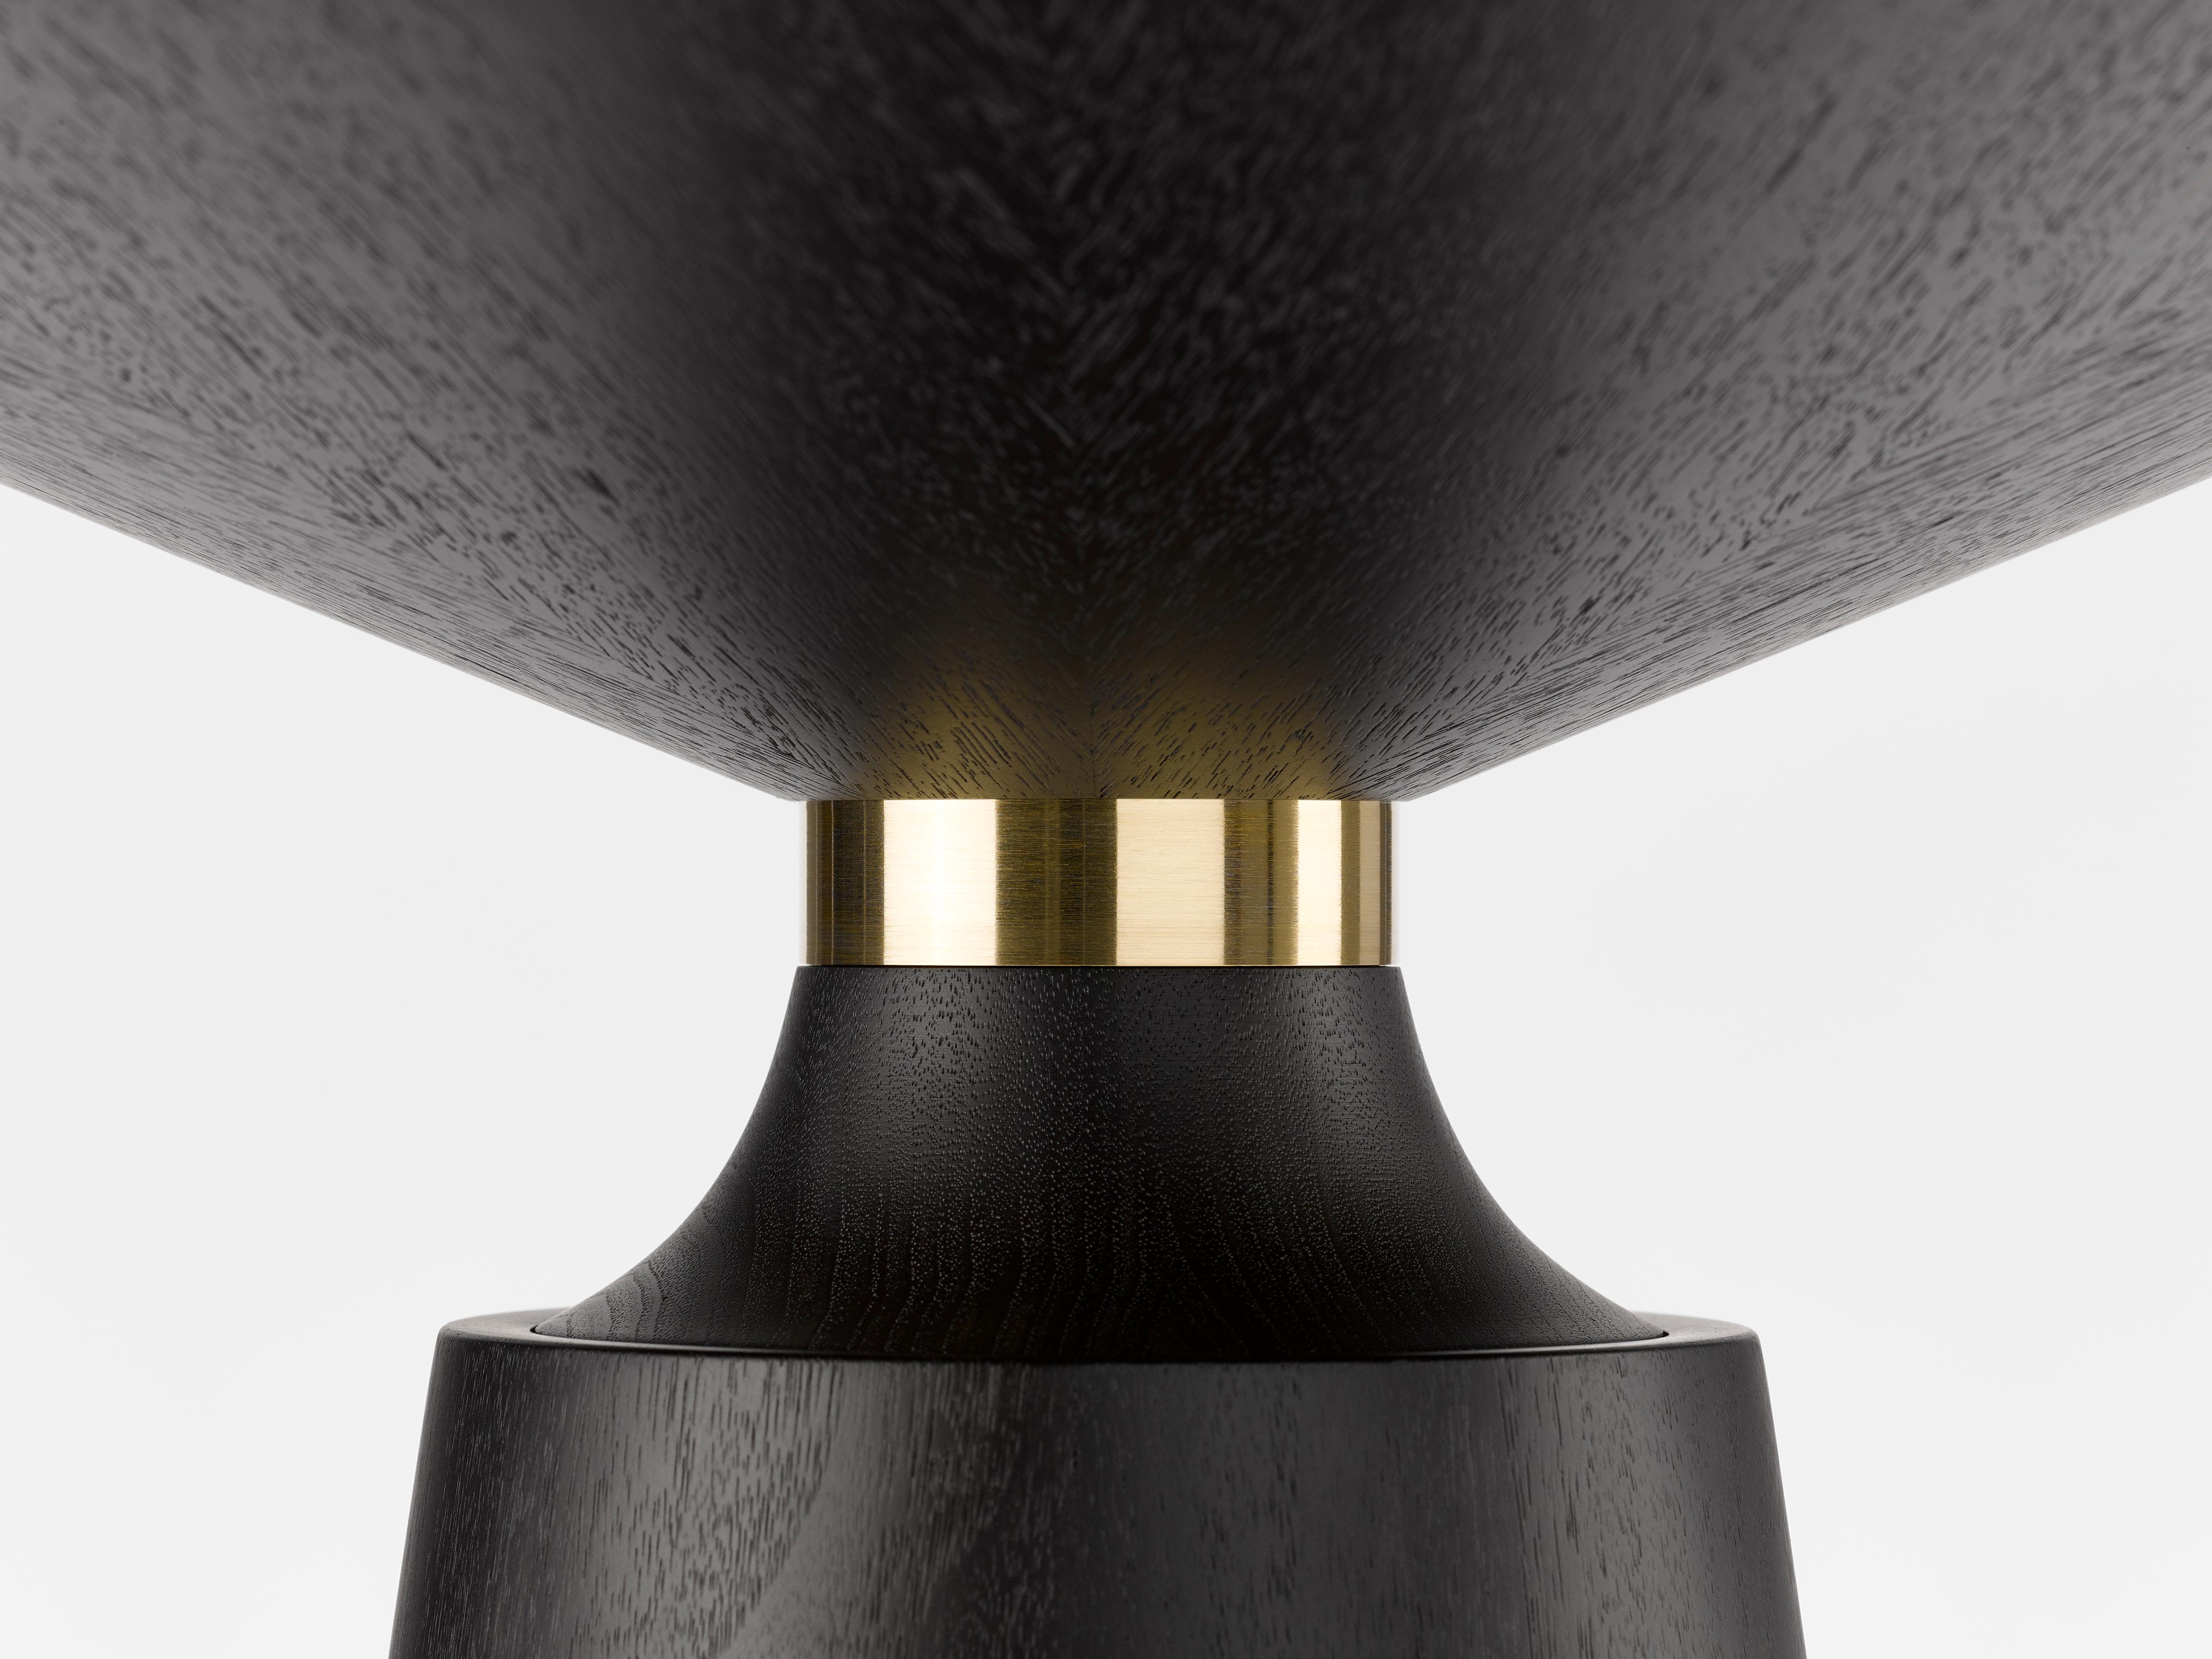 Contemporary Nicole Occasional Table in Black Lacquered Walnut and Brass Neuf - En vente à Trowbridge, Wiltshire